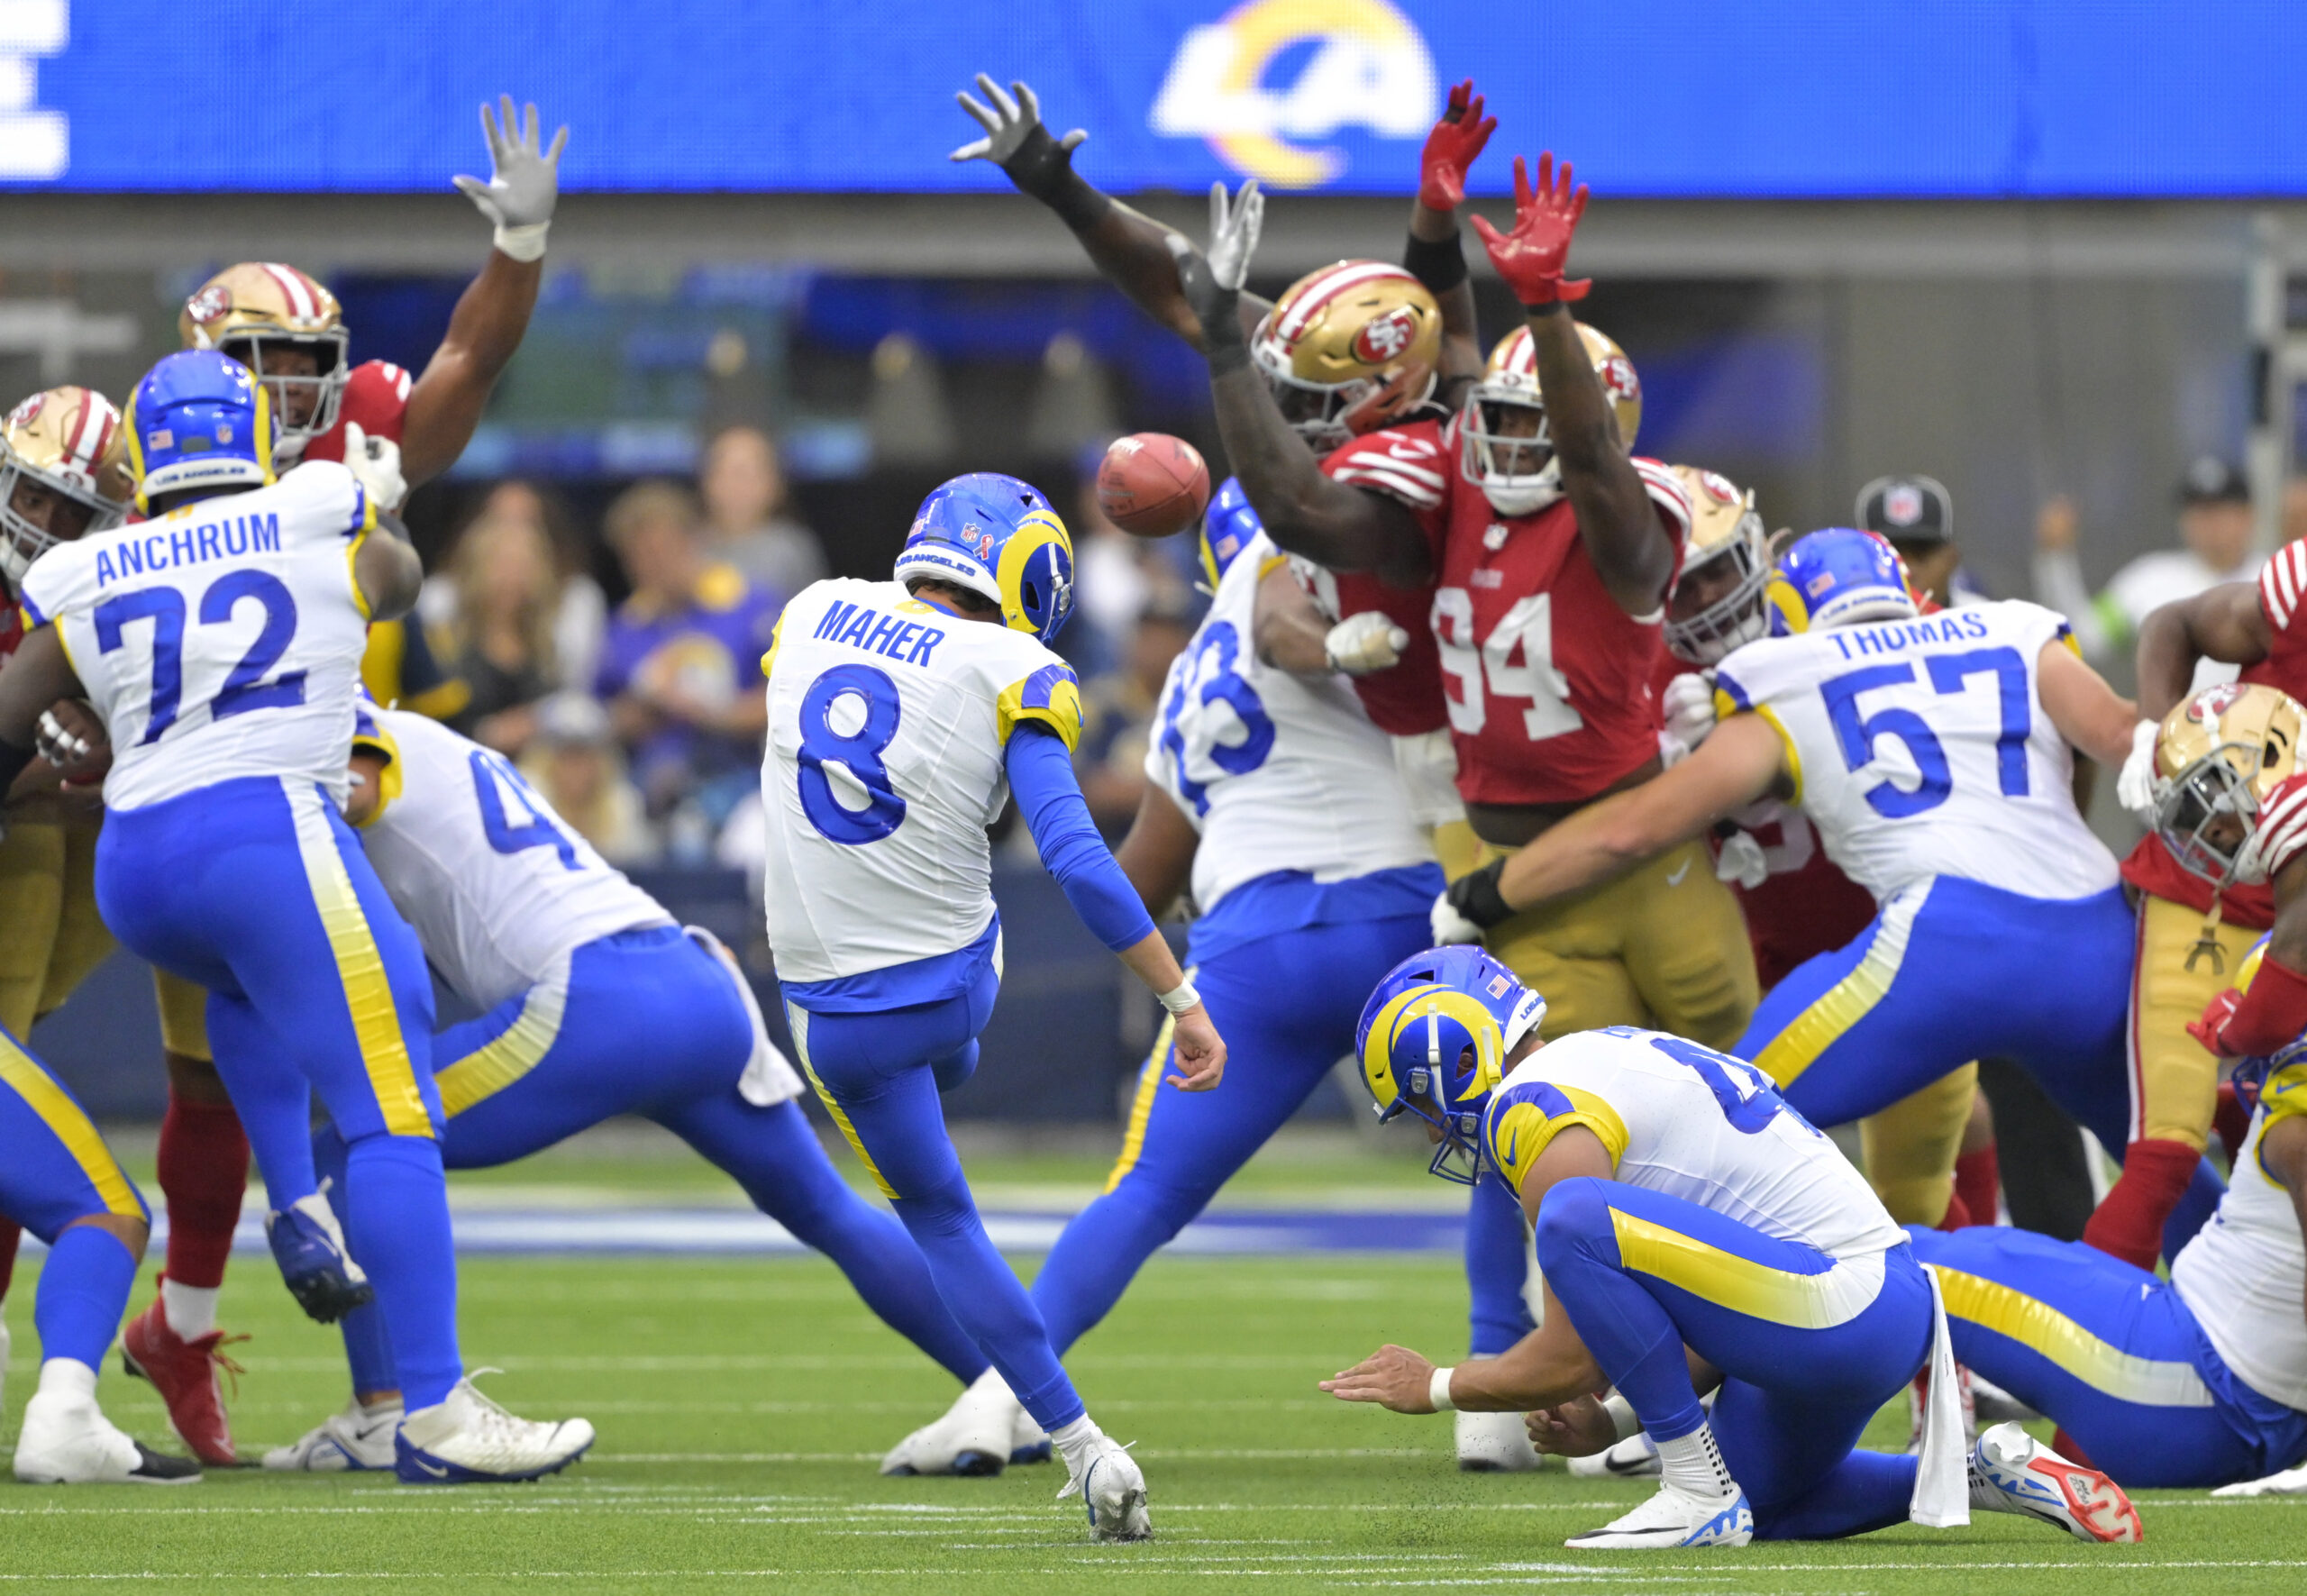 NFL Bad Beats: Rams Cover +7.5 in Final Seconds With Game-Ending Field Goal